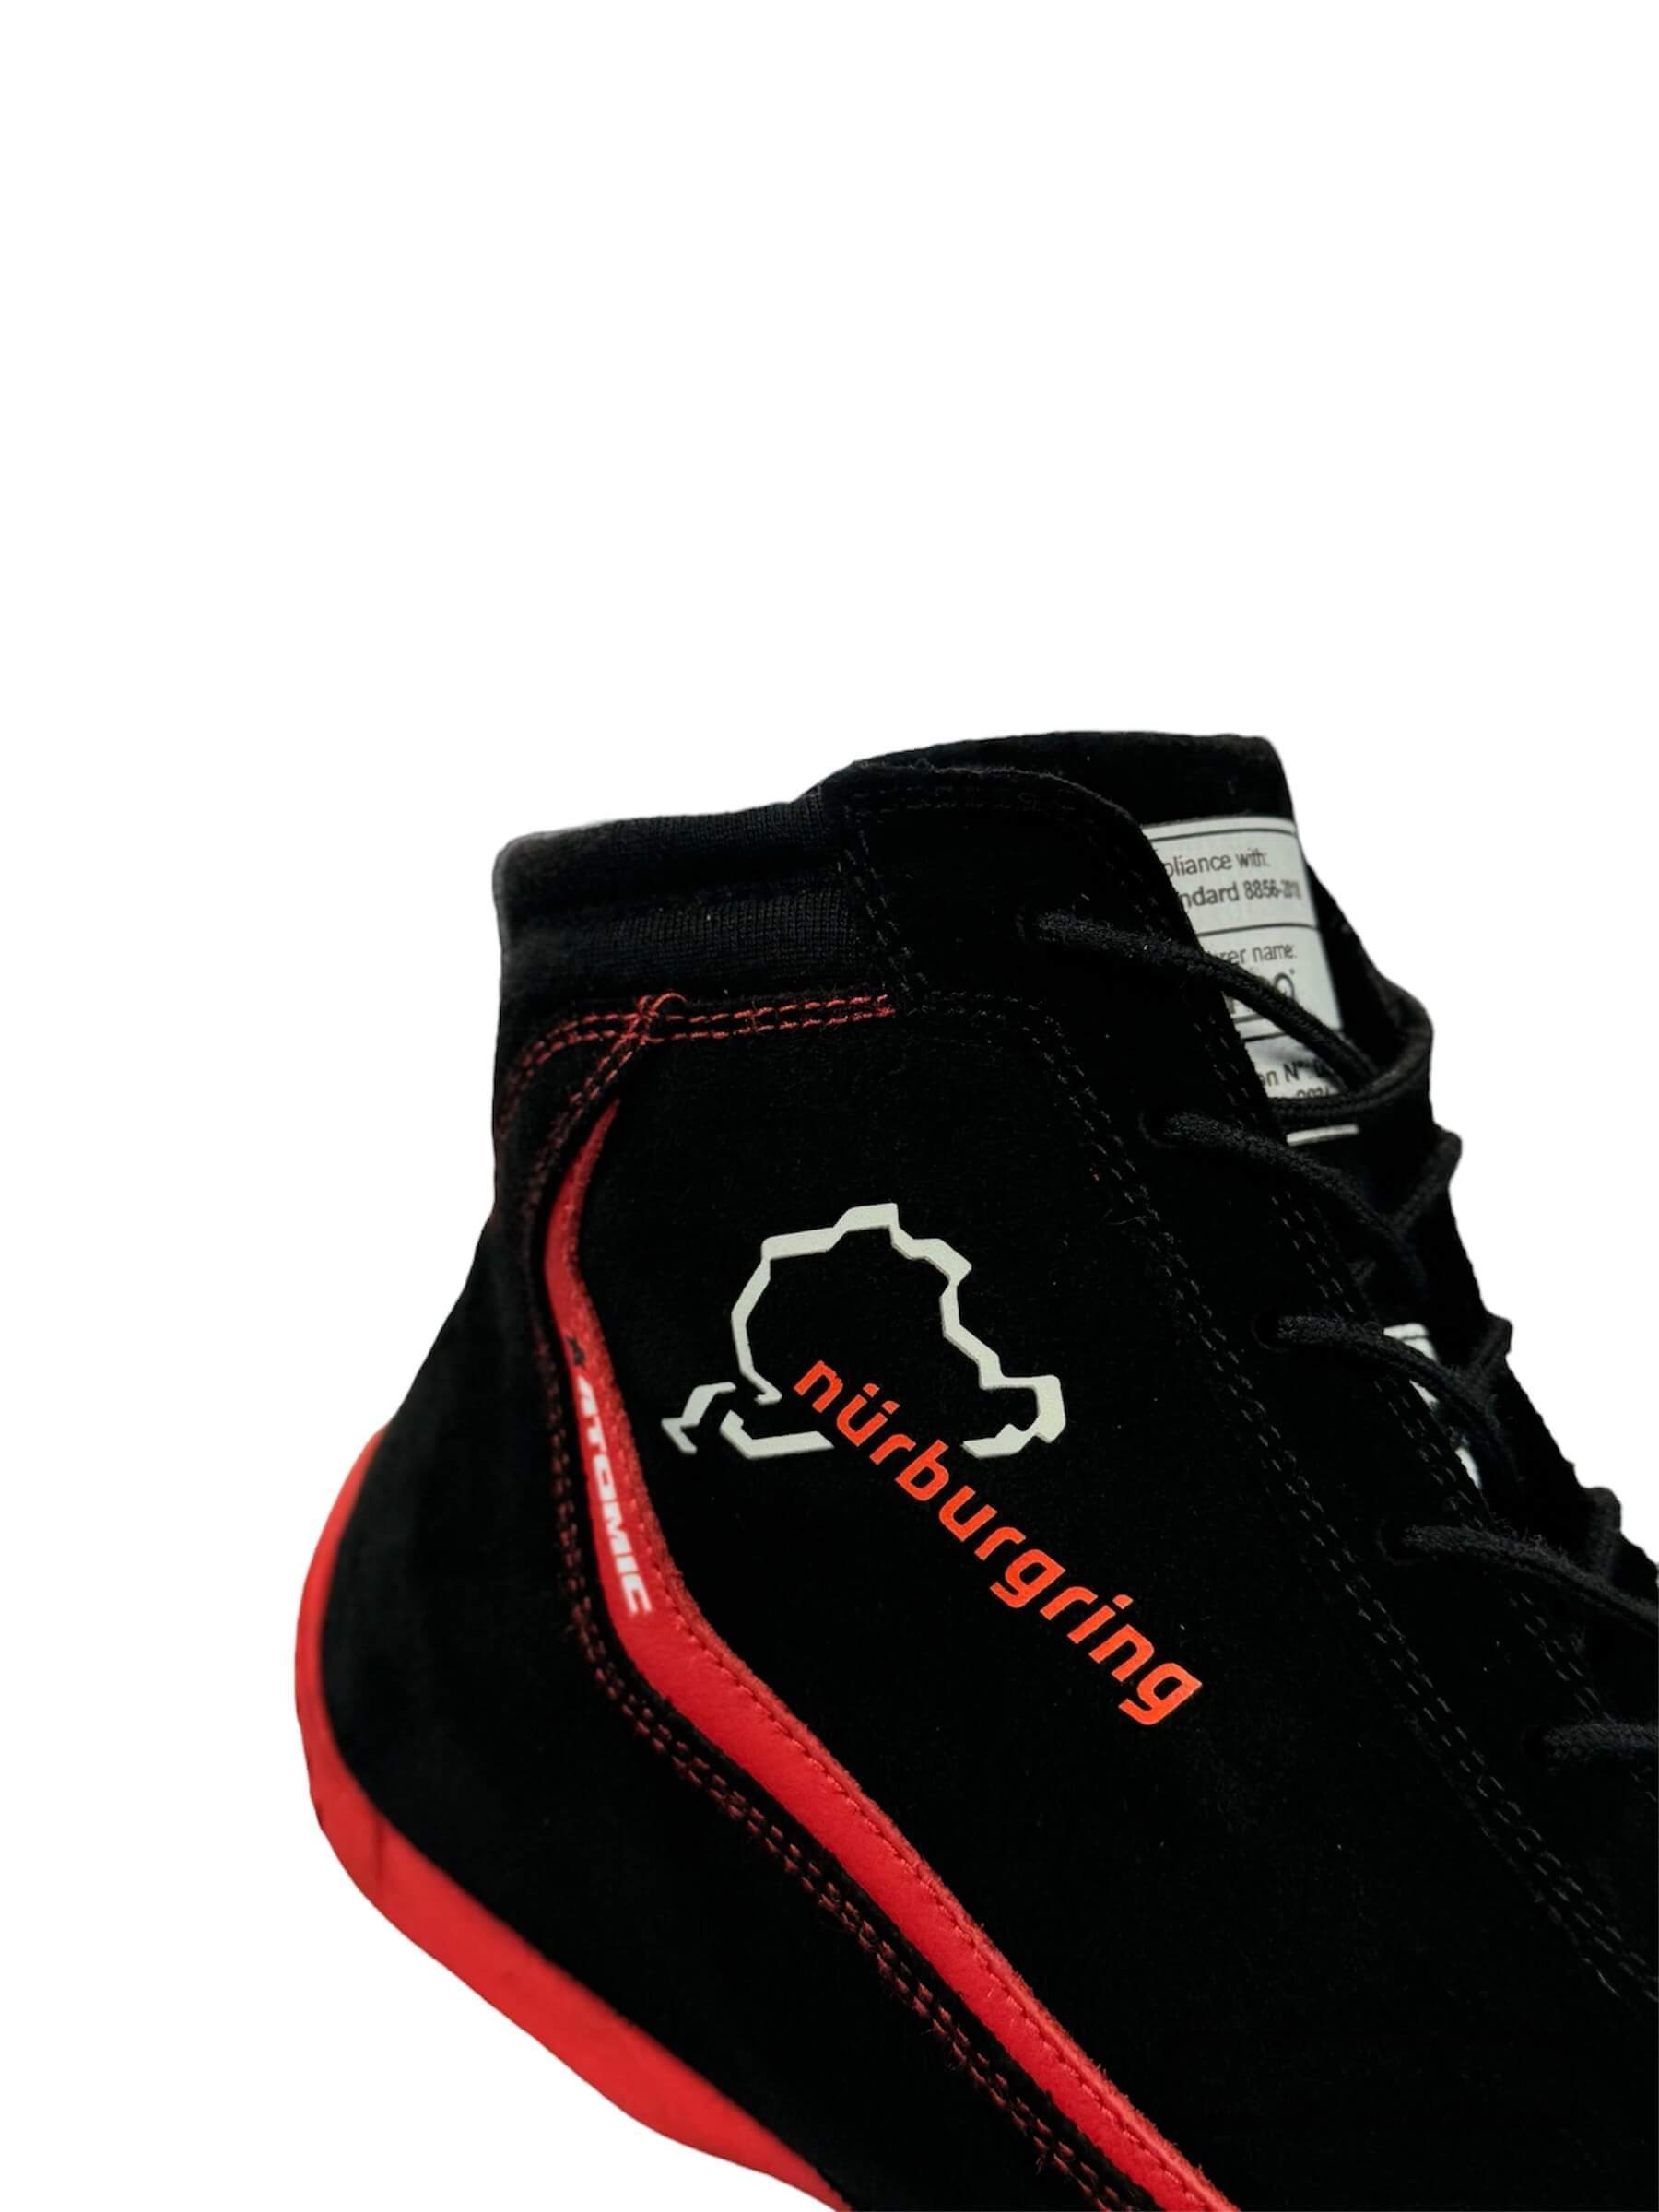 SPARCO 001295SP_NBR45 Shoes Slalom Nurburgring Edition black/red Size 45 Photo-4 